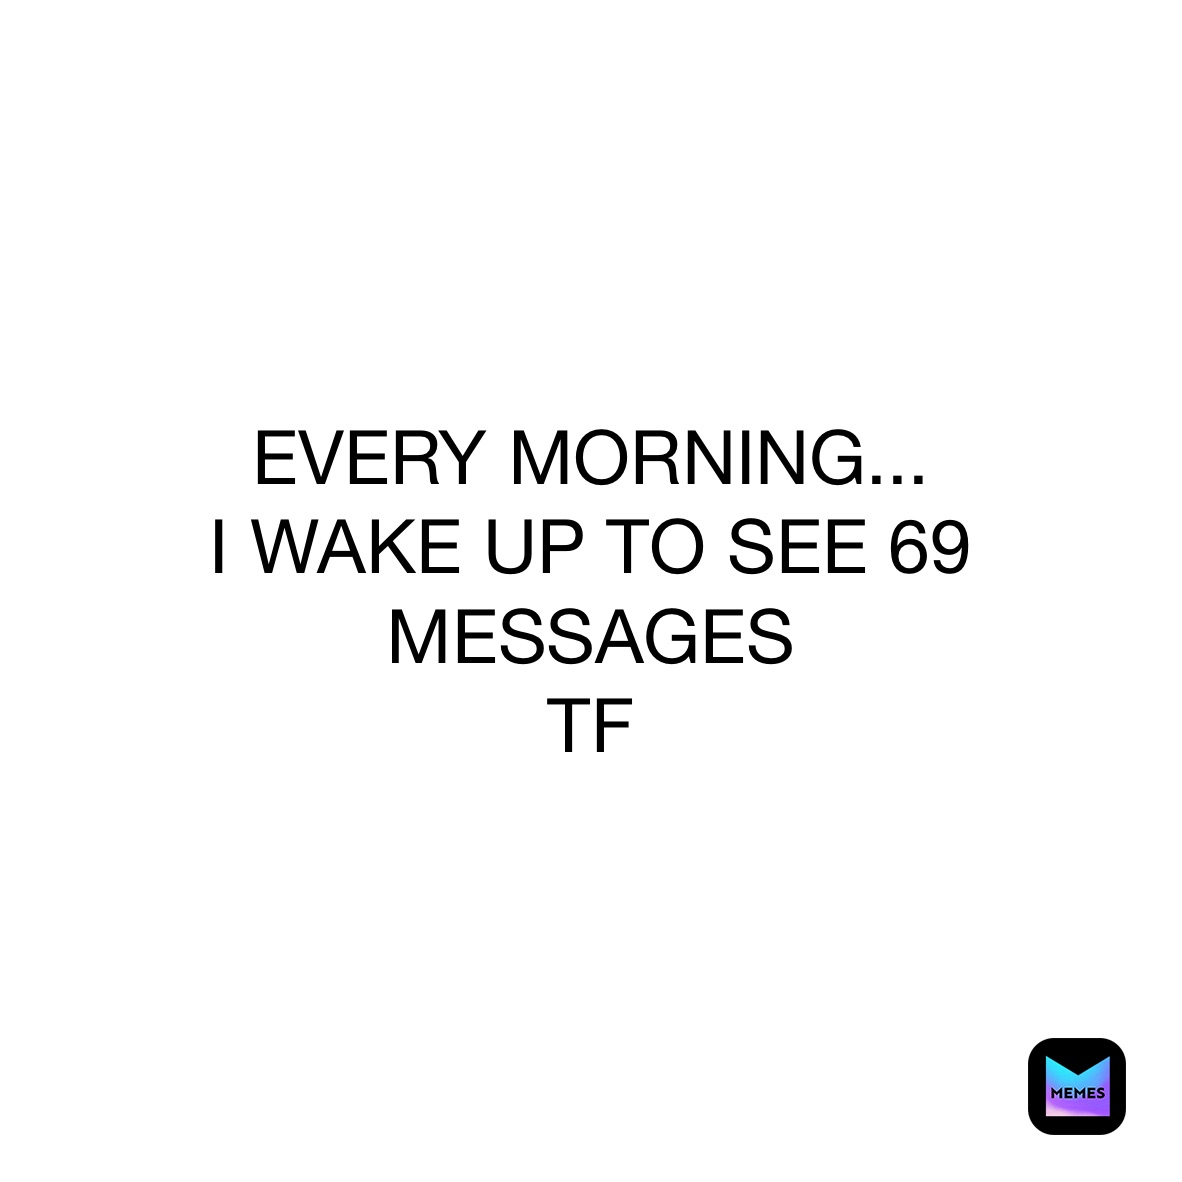 EVERY MORNING...
I WAKE UP TO SEE 69 MESSAGES
TF